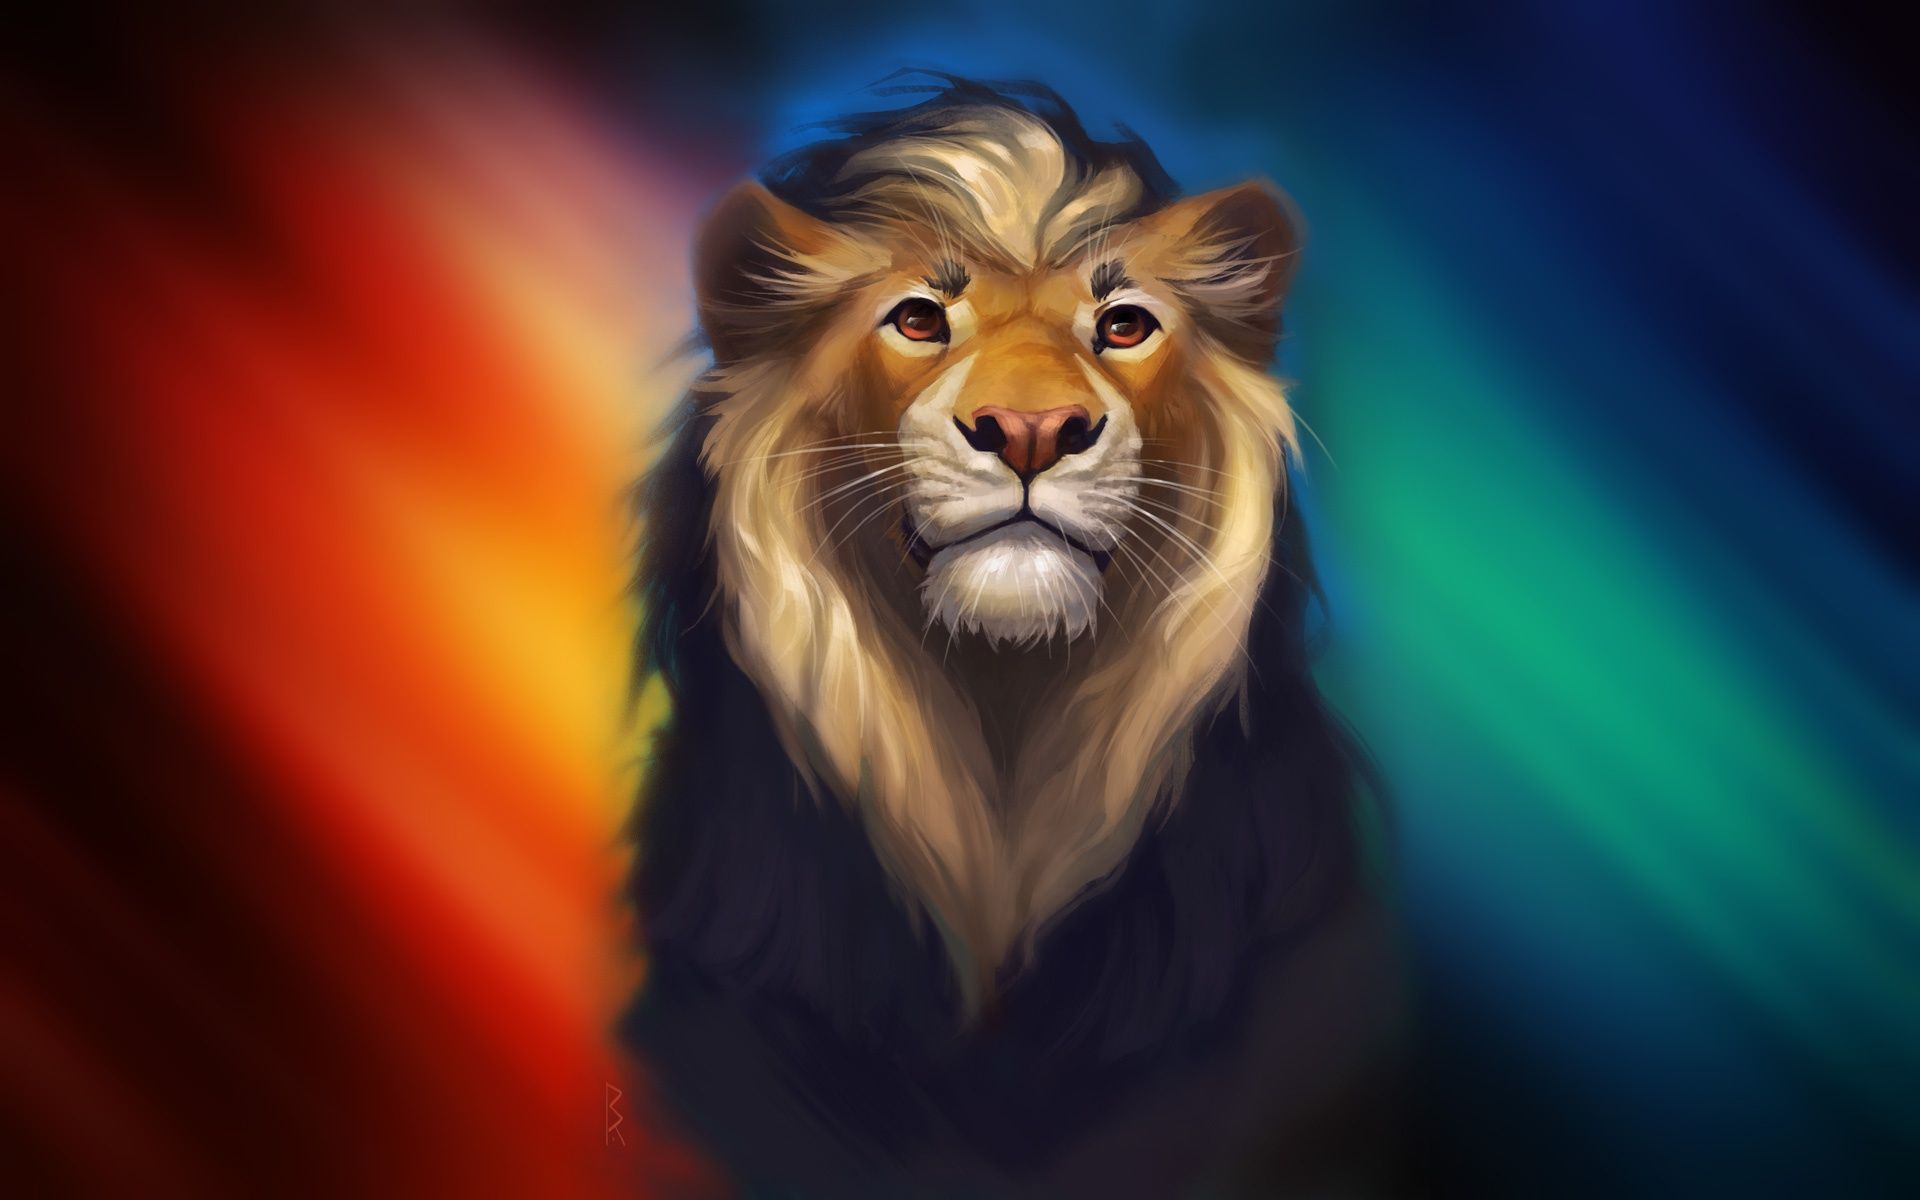 Lion Fantasy Colorful Art, HD Animals, 4k Wallpaper, Image, Background, Photo and Picture